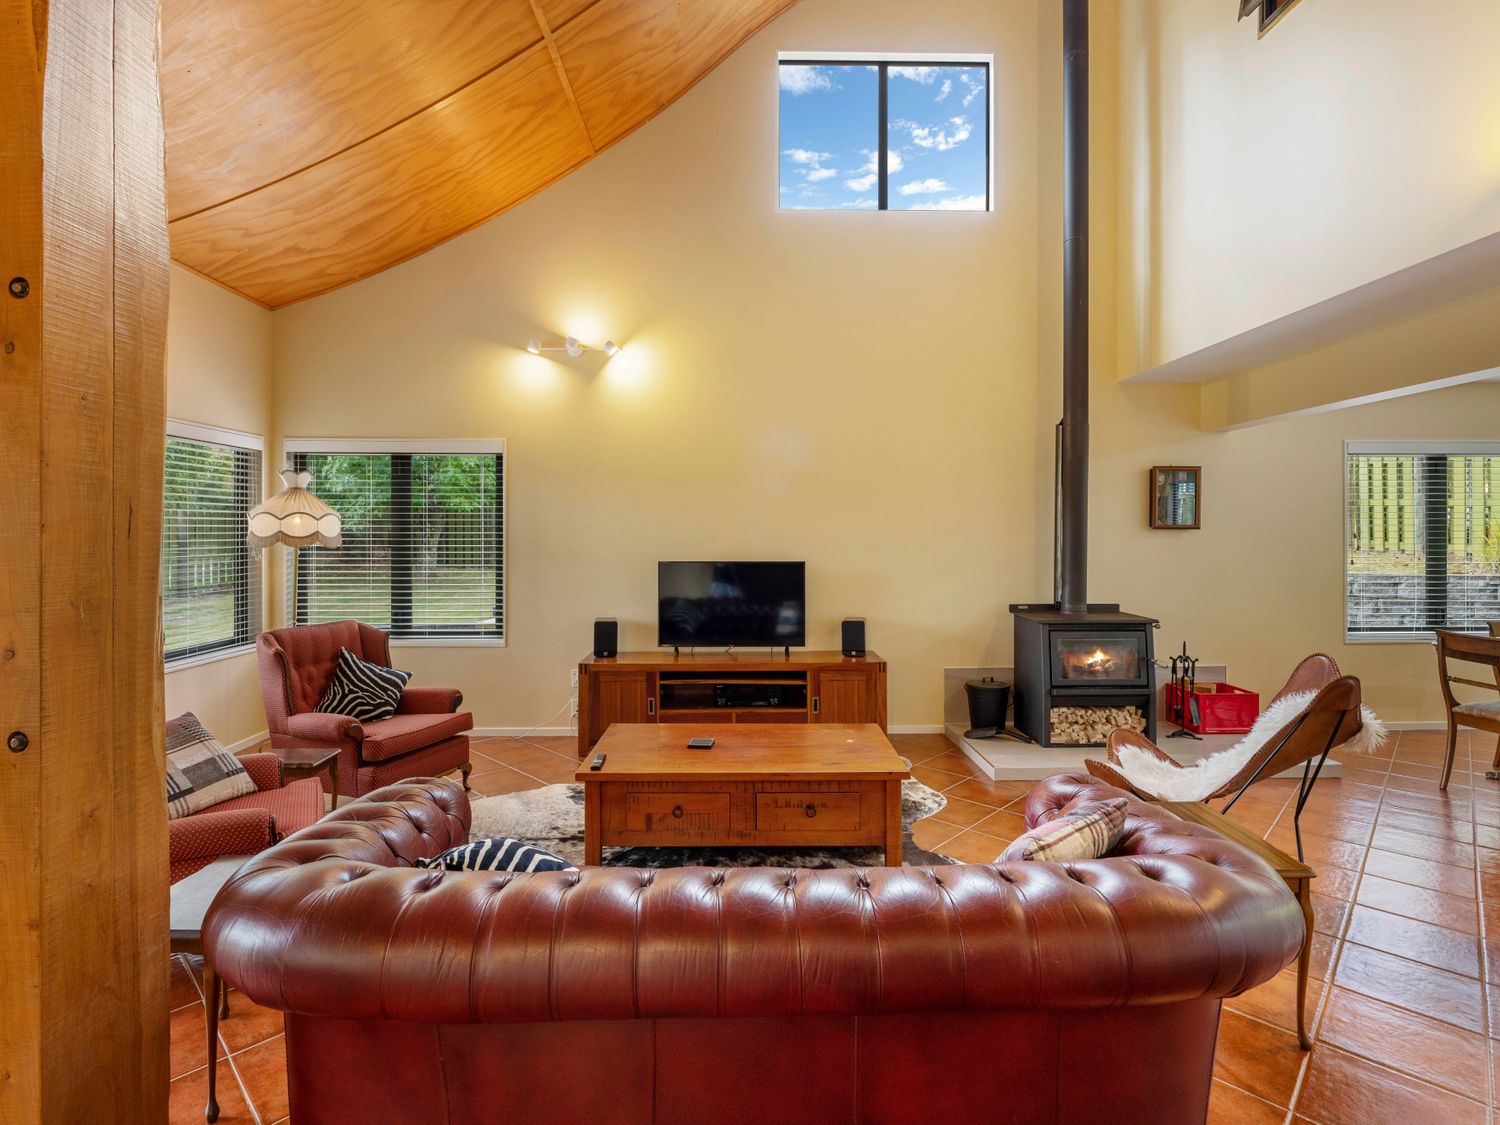 Modern Barn Style - Taupo Holiday Home -  - 1155134 - photo 1